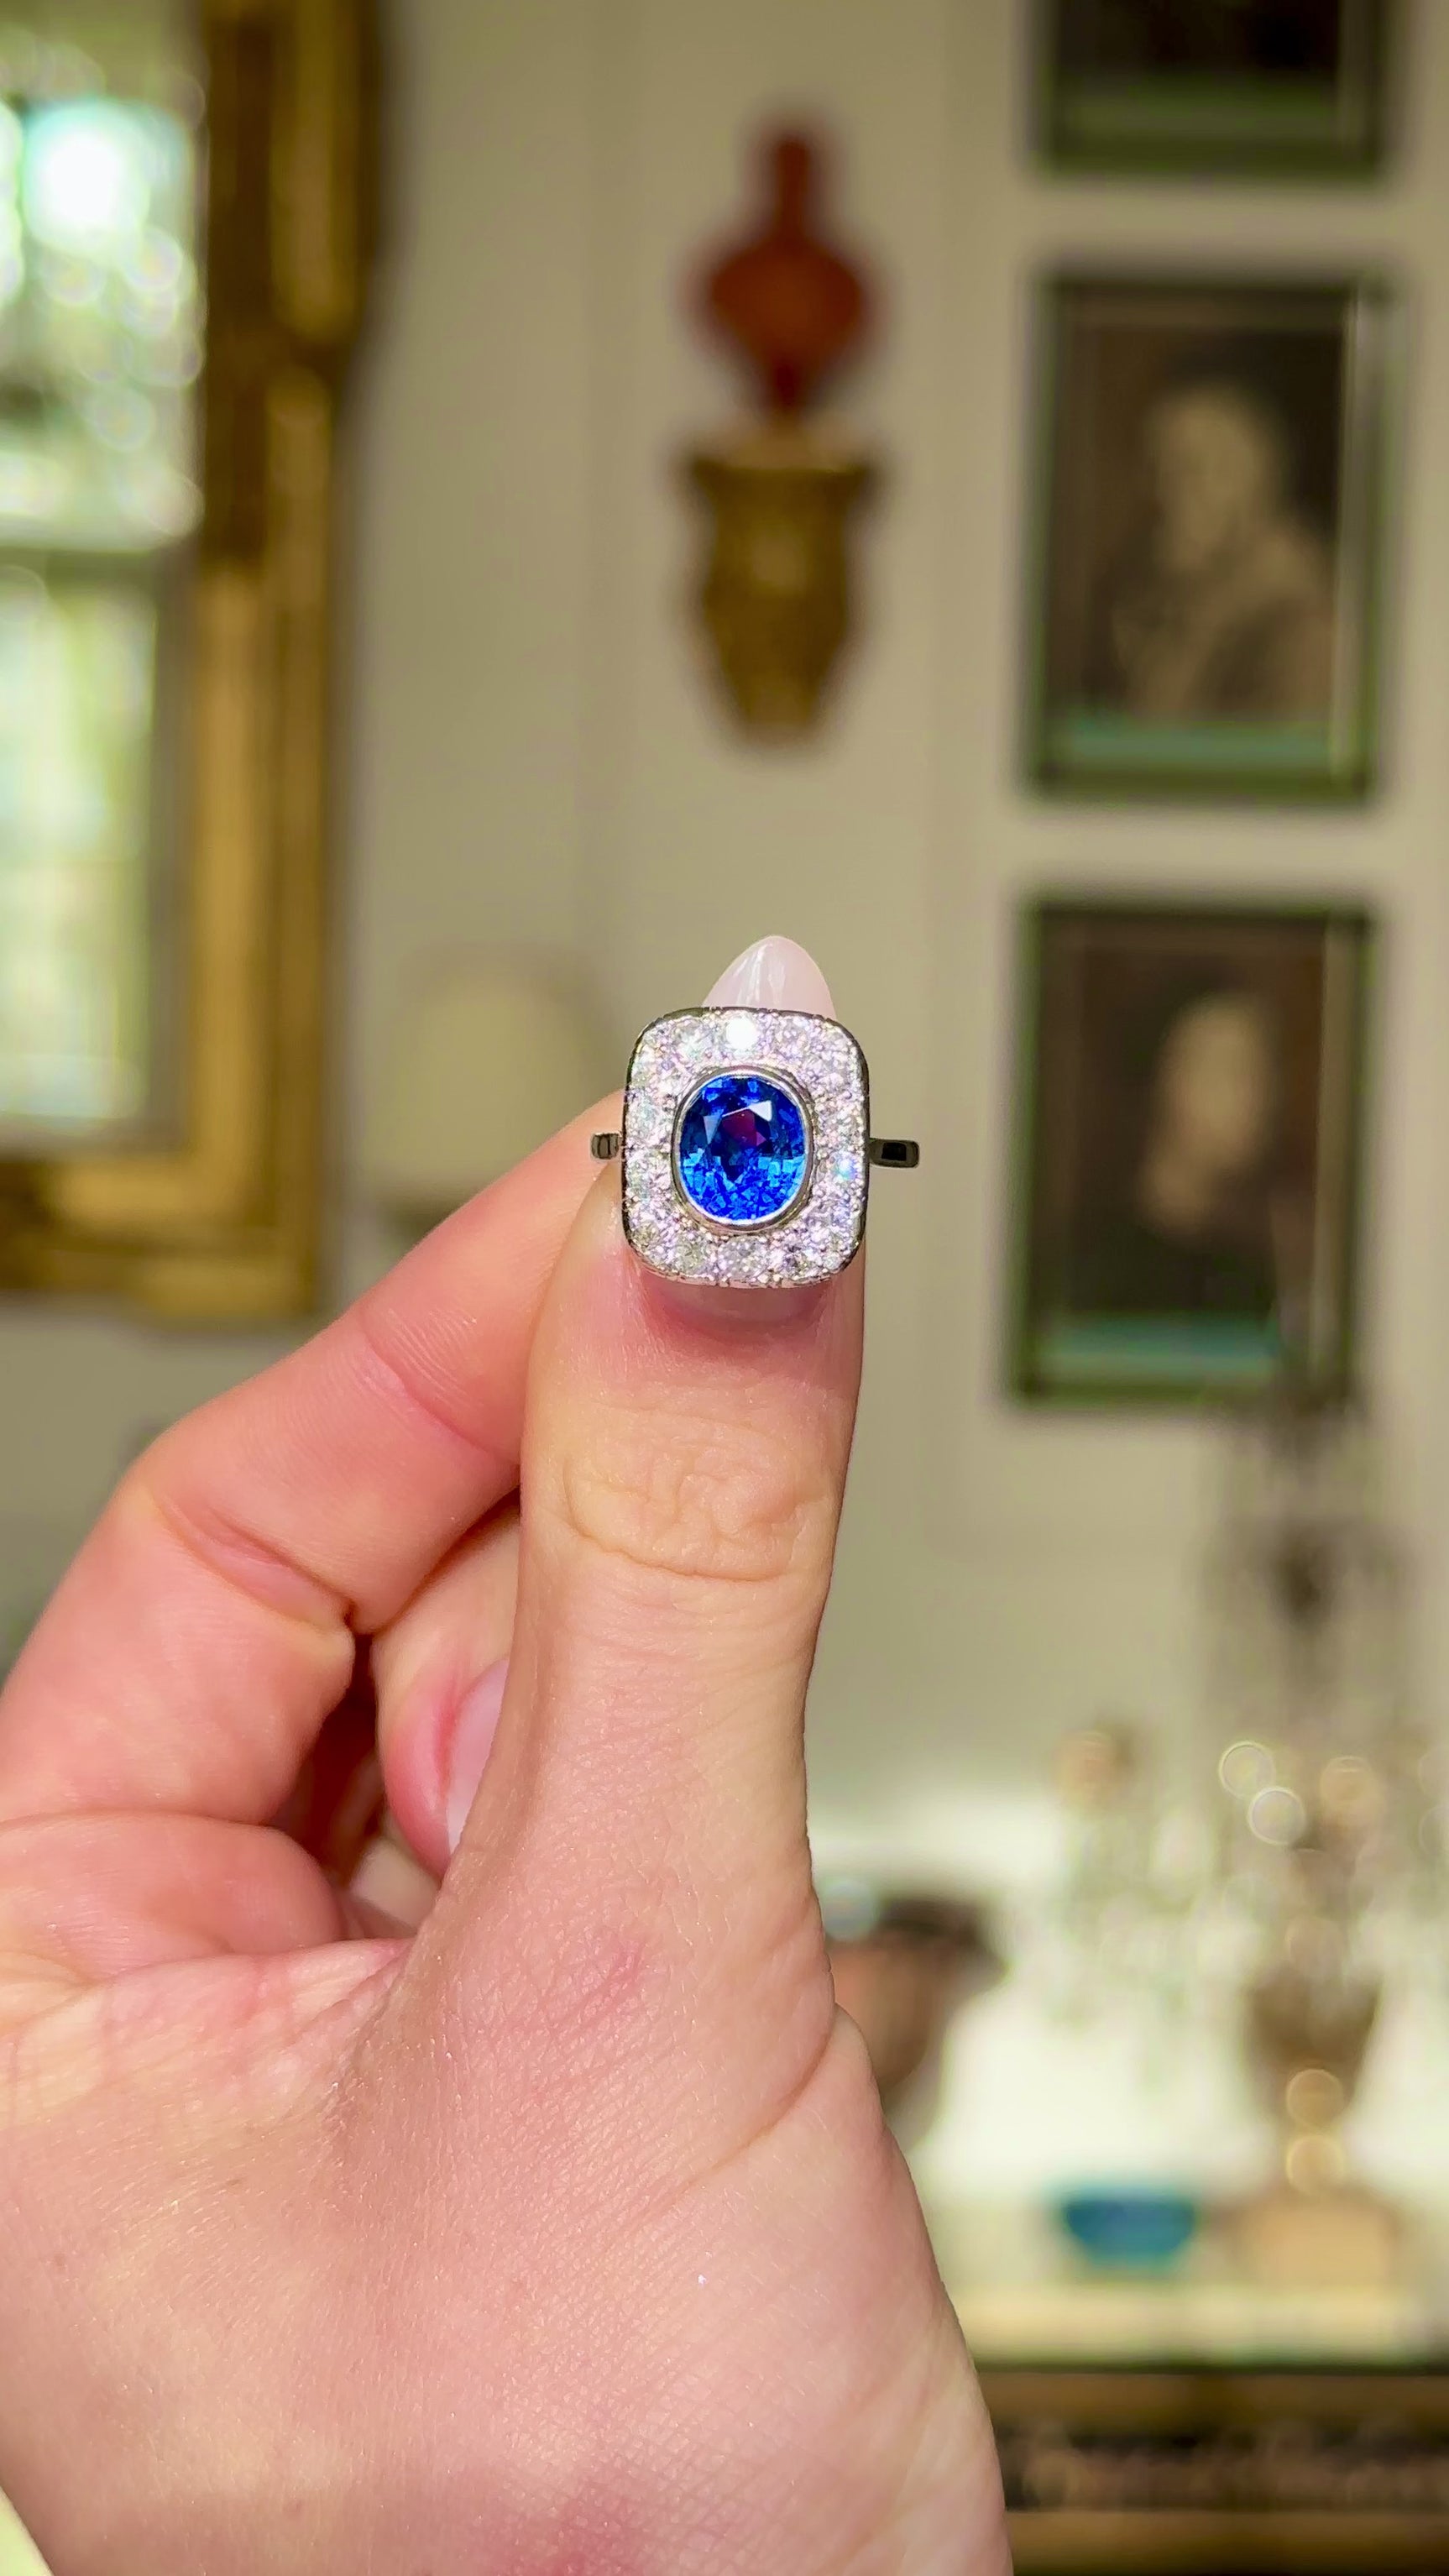 Art Deco sapphire and diamond cluster ring, held in fingers and moved around to give perspective.